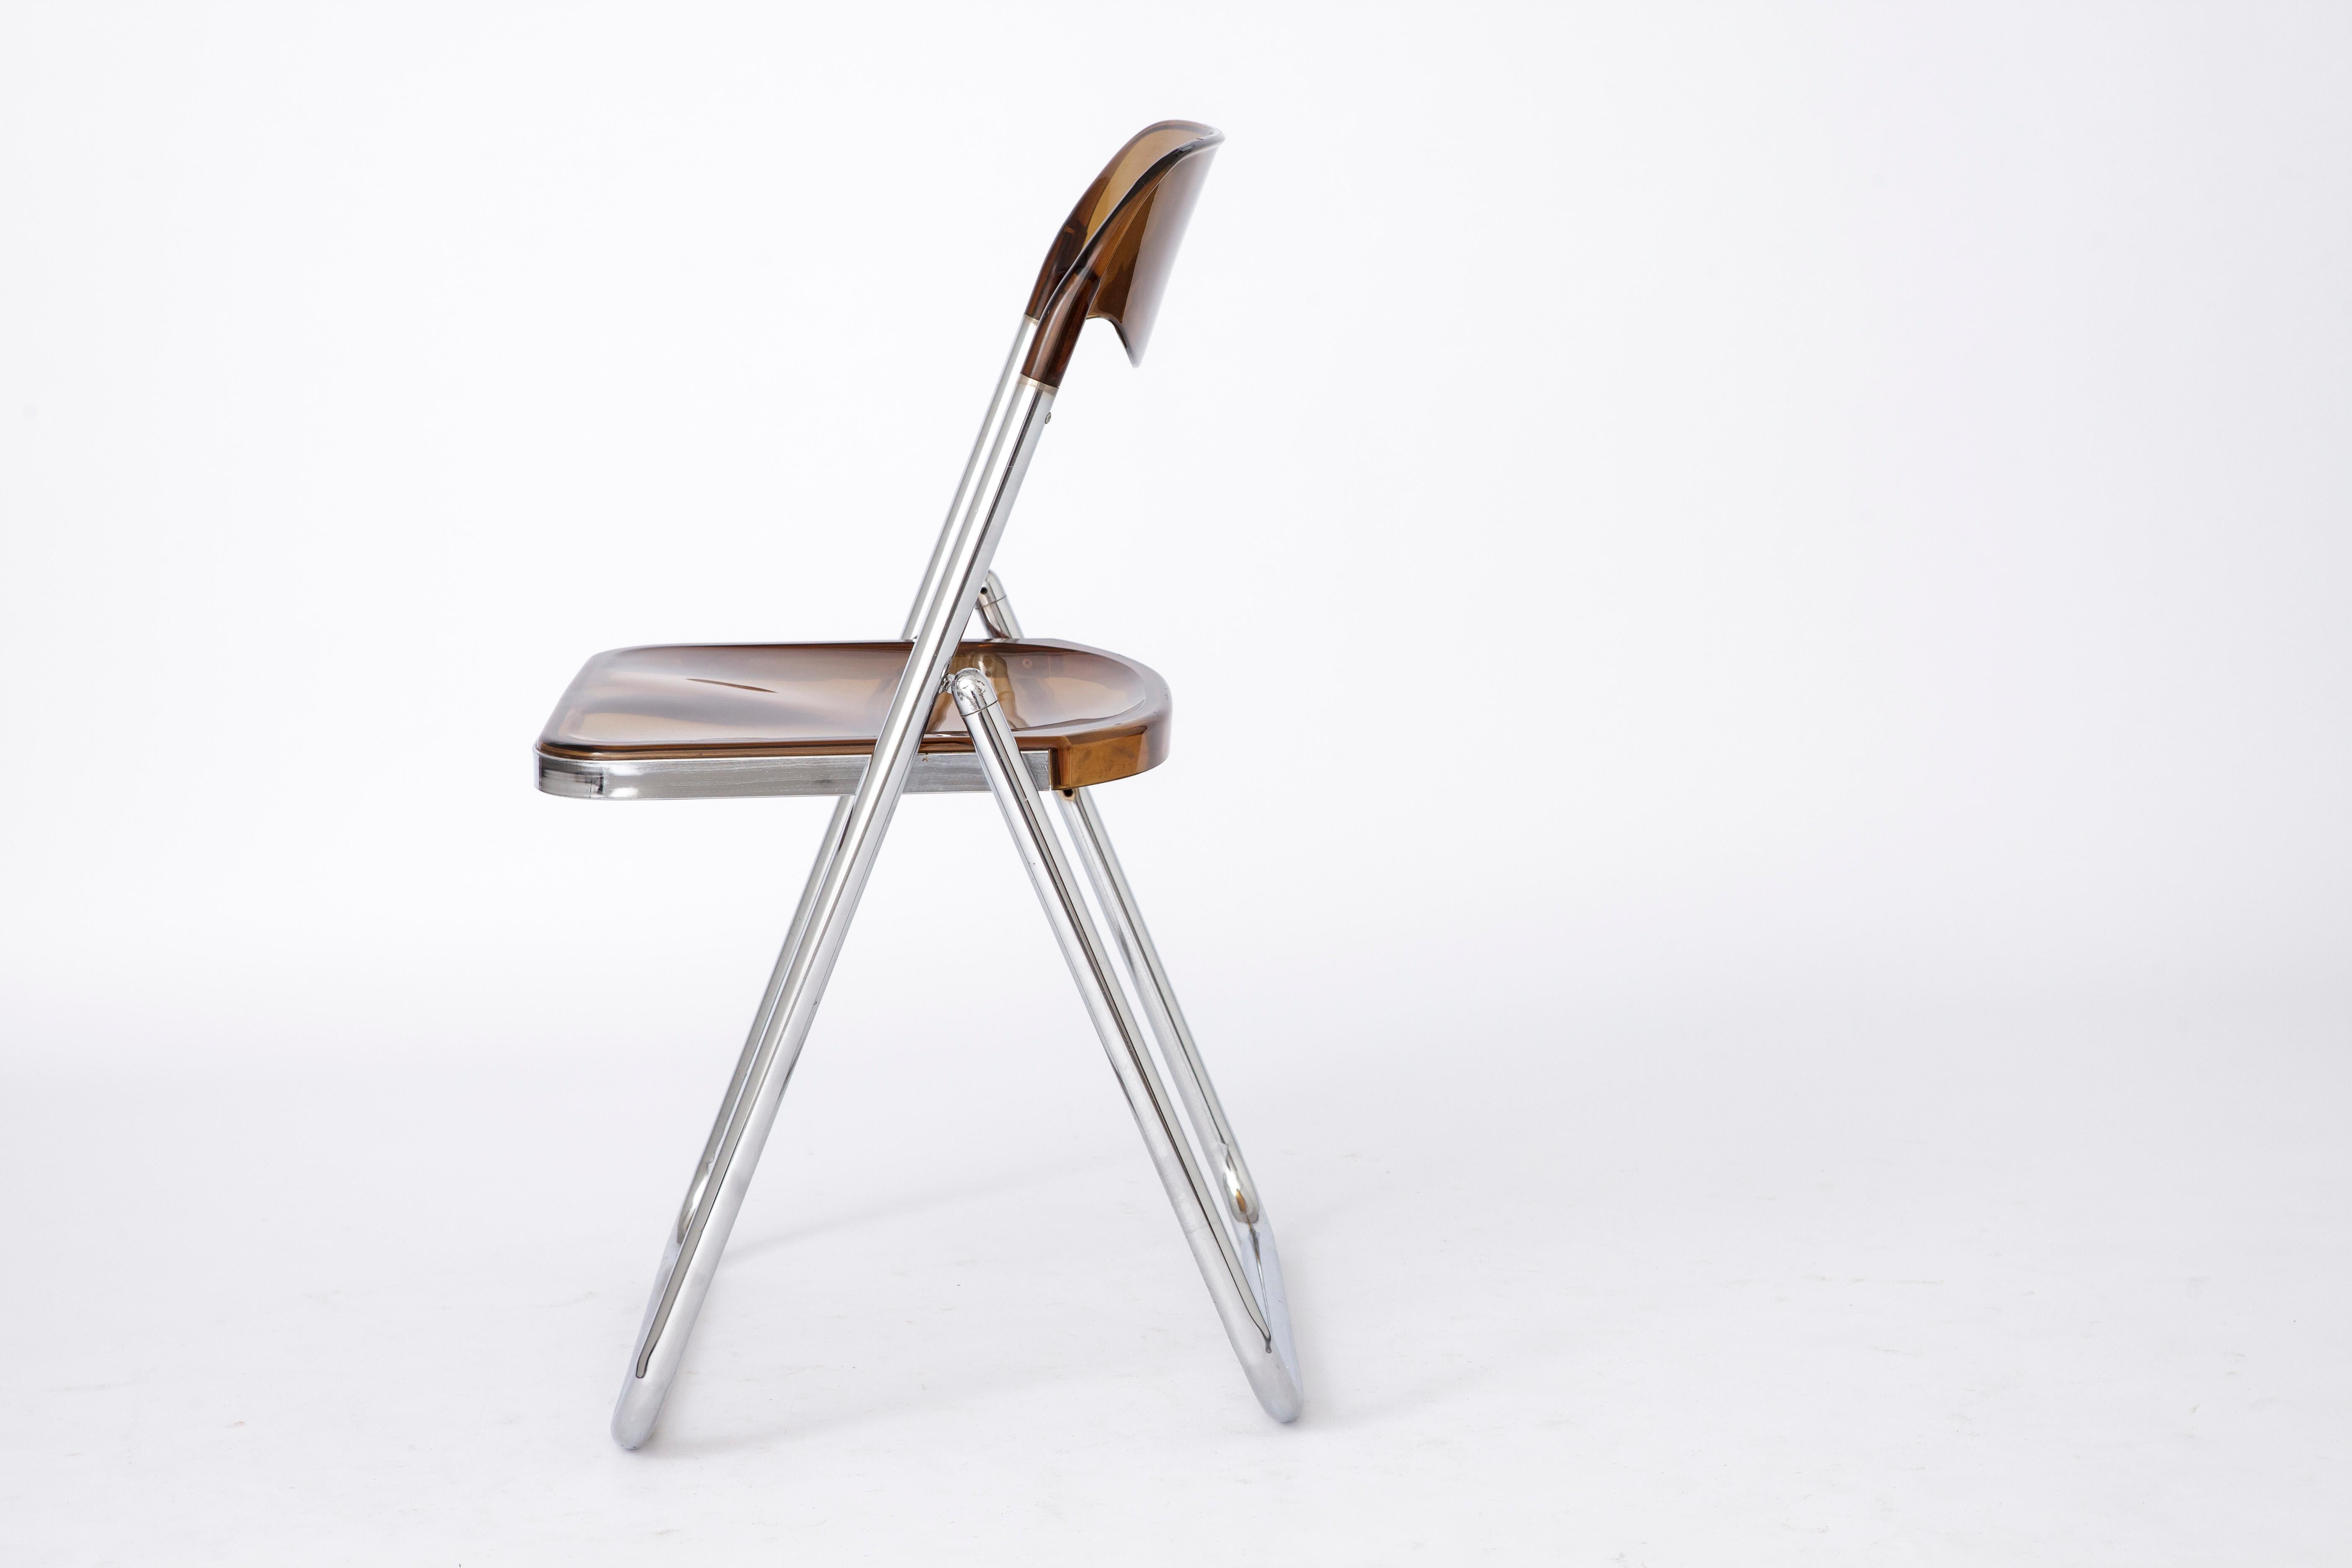 Polychromed Vintage Folding Chair 1960s-1970s Italy For Sale